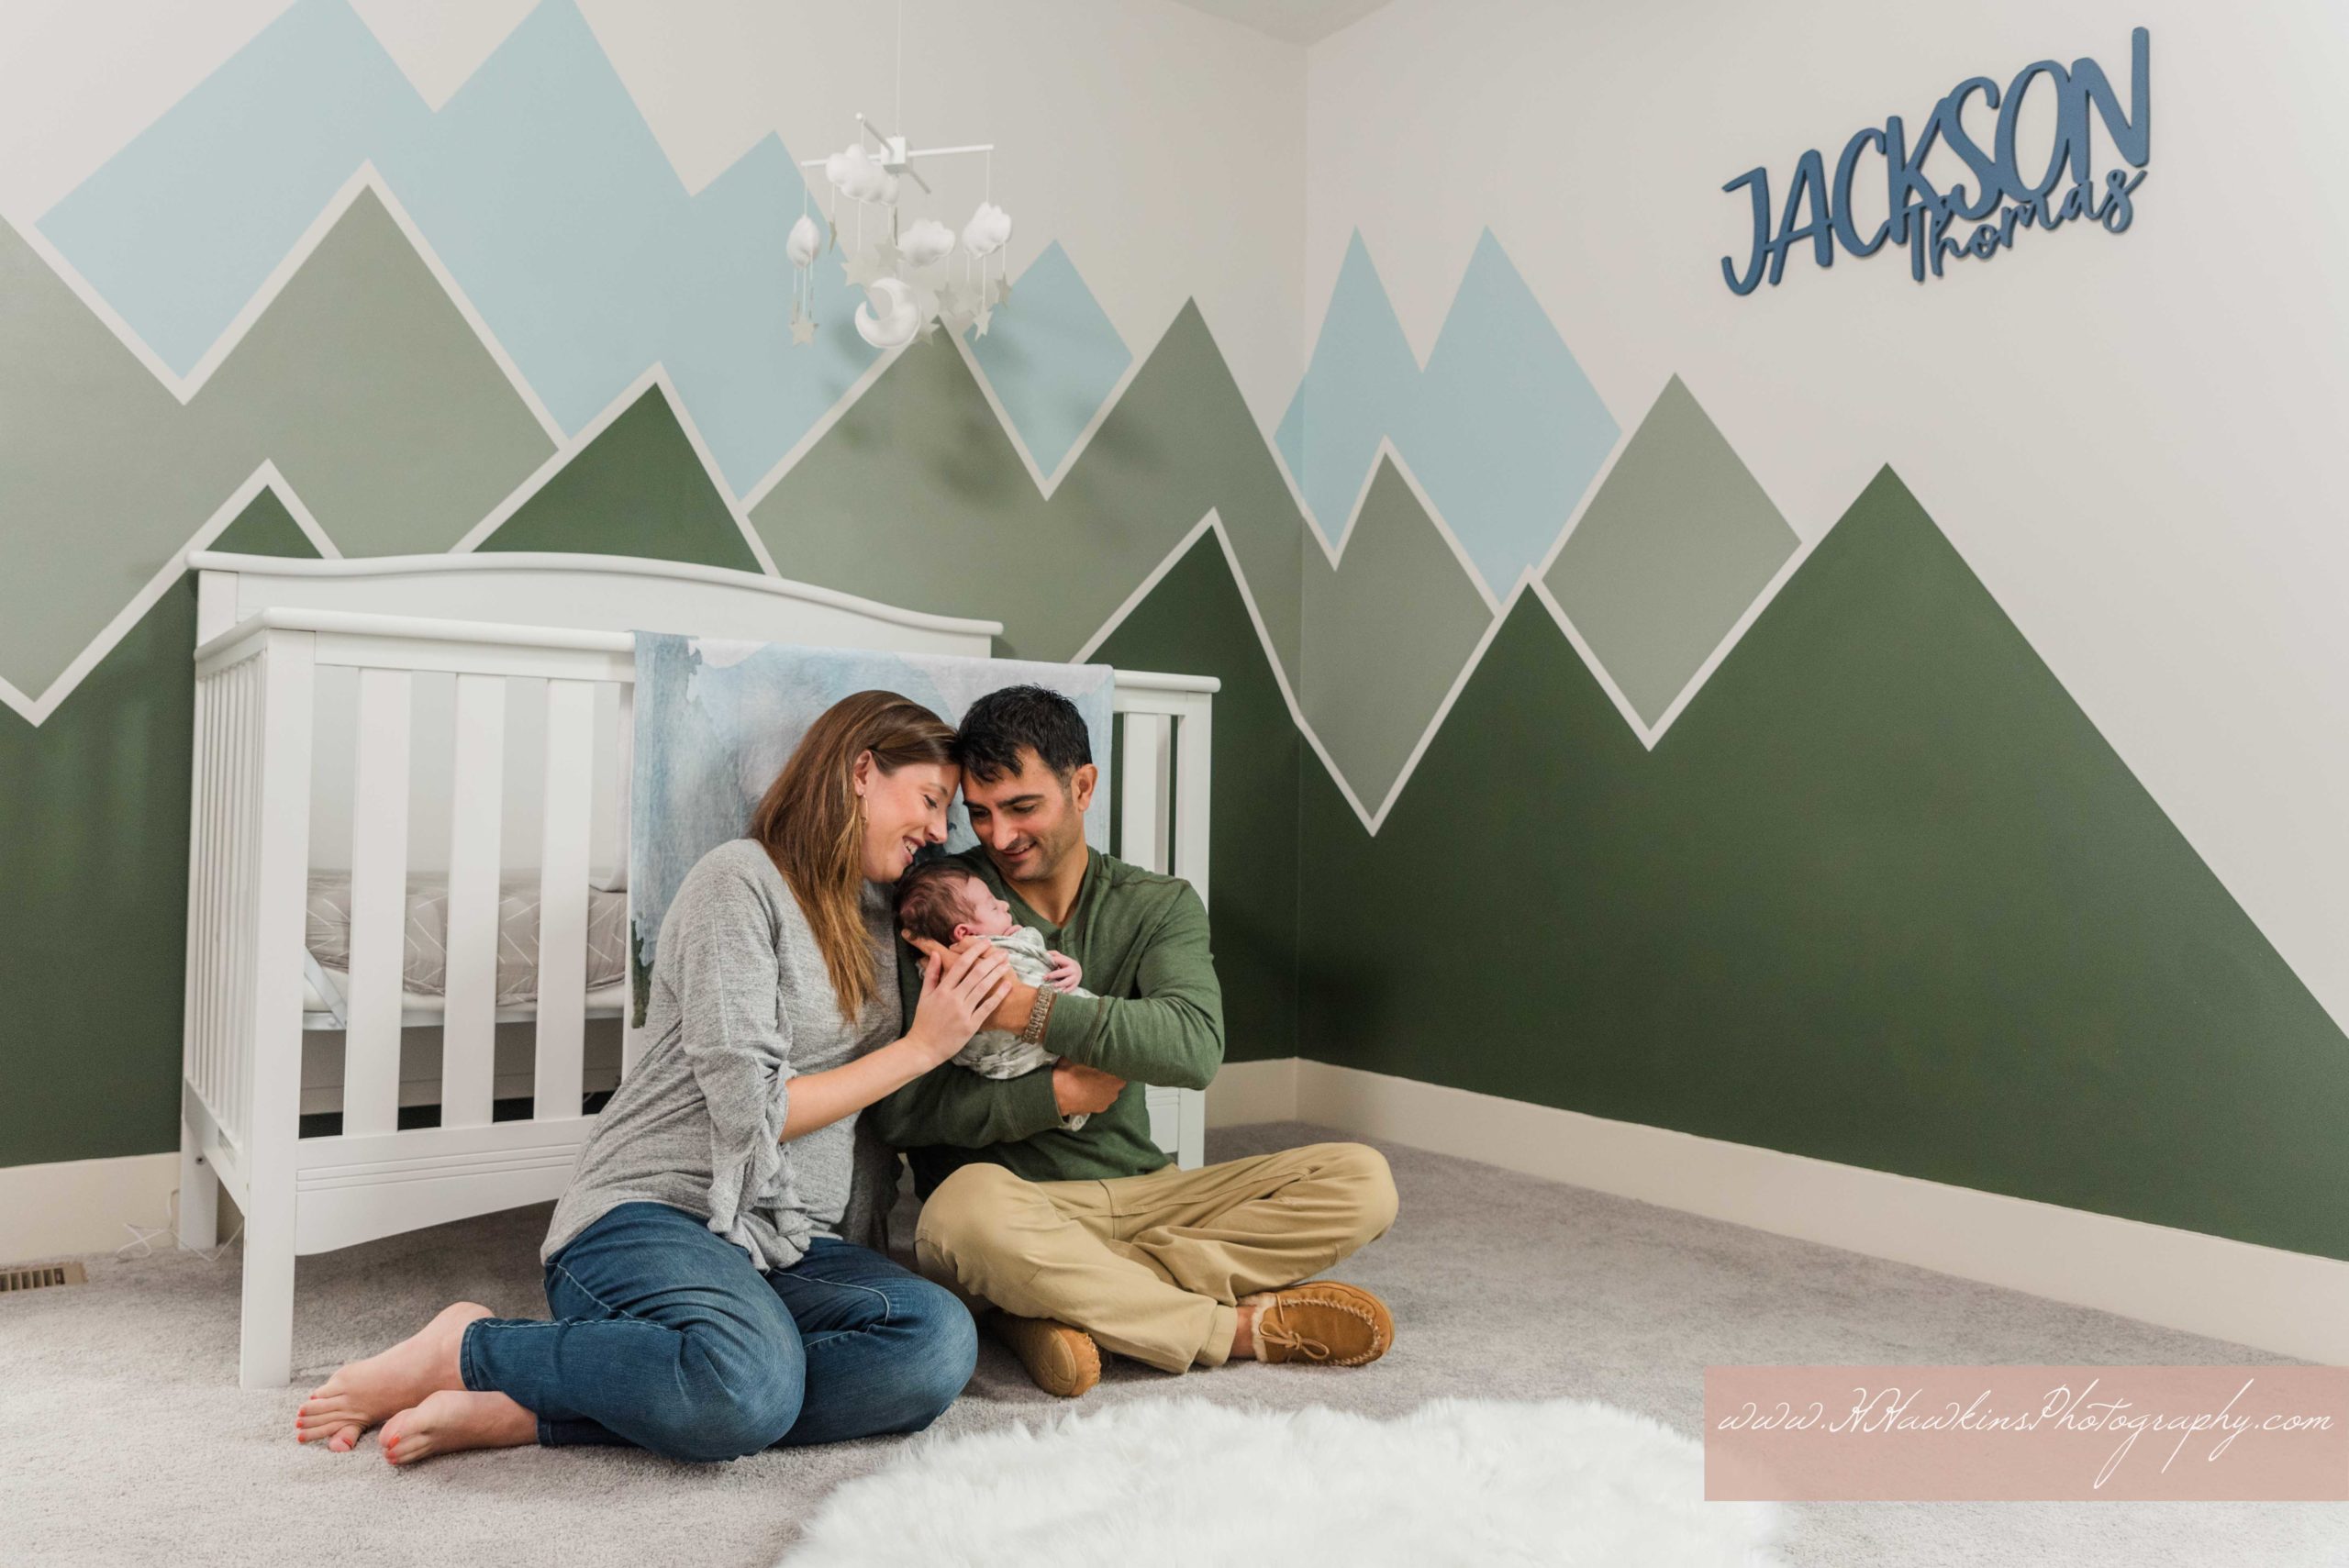 Dad and mom adore newborn baby boy in his green and blue adventure mountain themed nursery